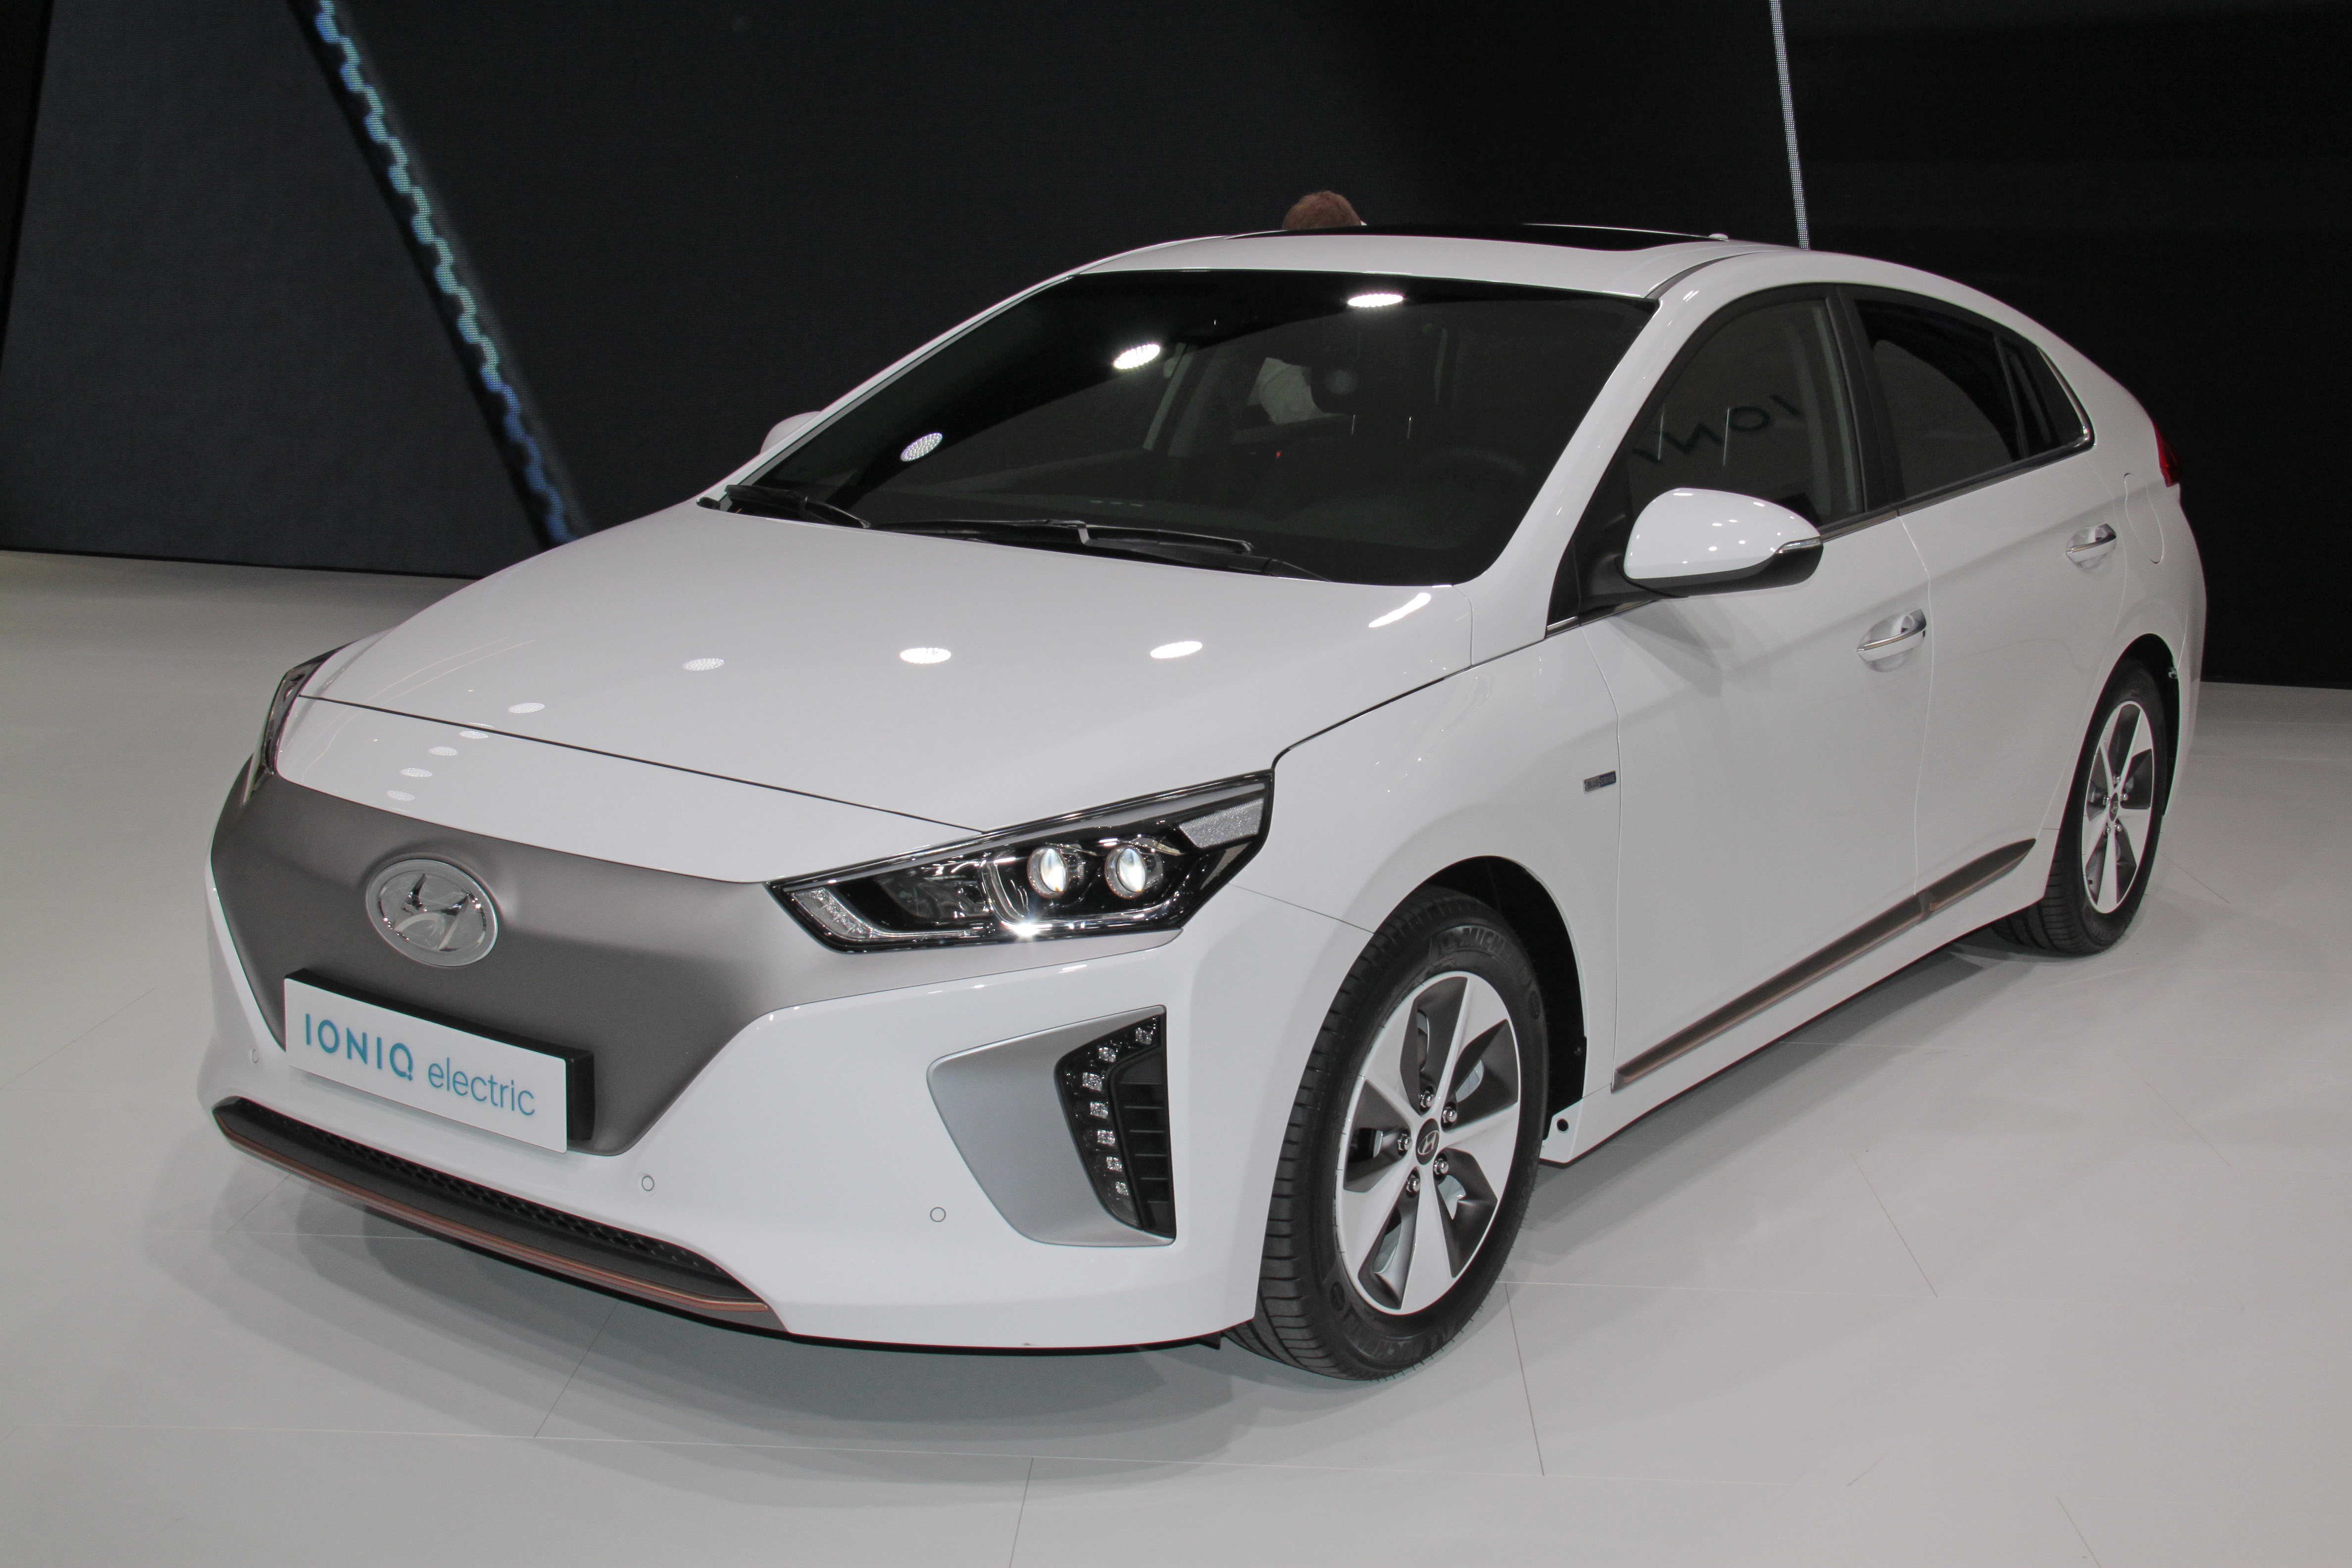 https://www.ludego.com/wp-content/uploads/2016/12/Hyundai_Ioniq_Electric_By-Pablo-Montoya-Own-work-CC-BY-SA-4.0-httpscommons.wikimedia.orgwindex.phpcurid48180088.jpg